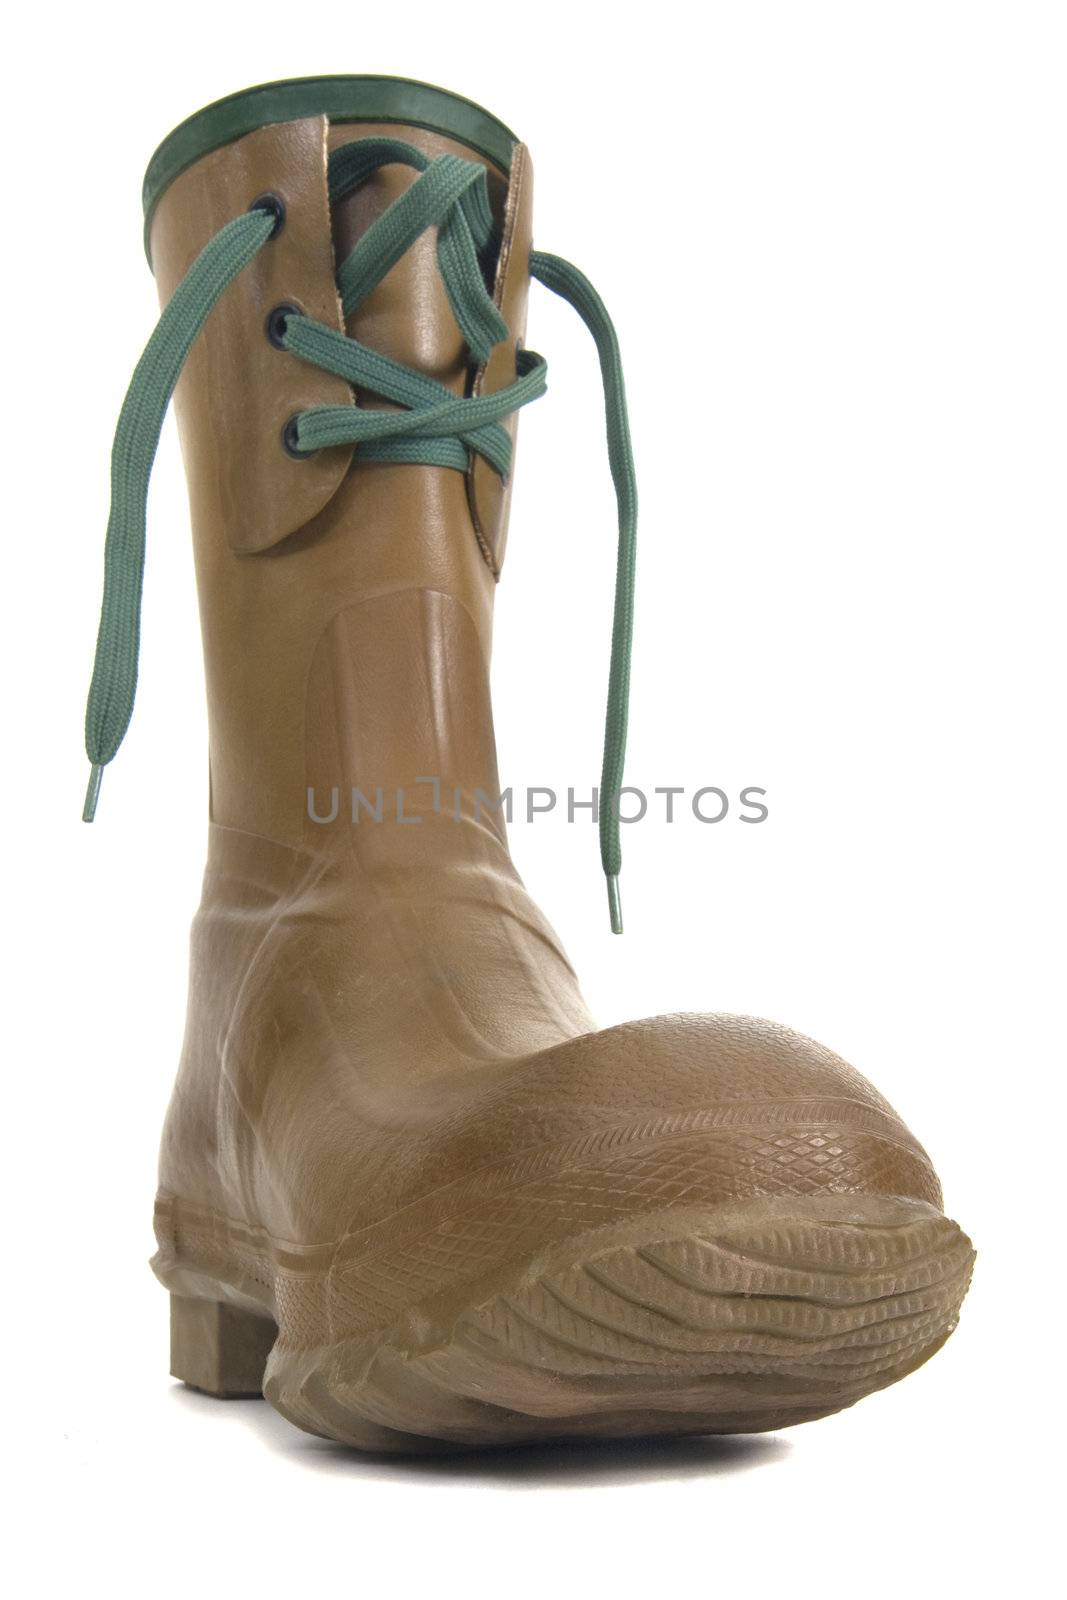 heavy rubber boot with laces on white background, distorted low wide angle perspective